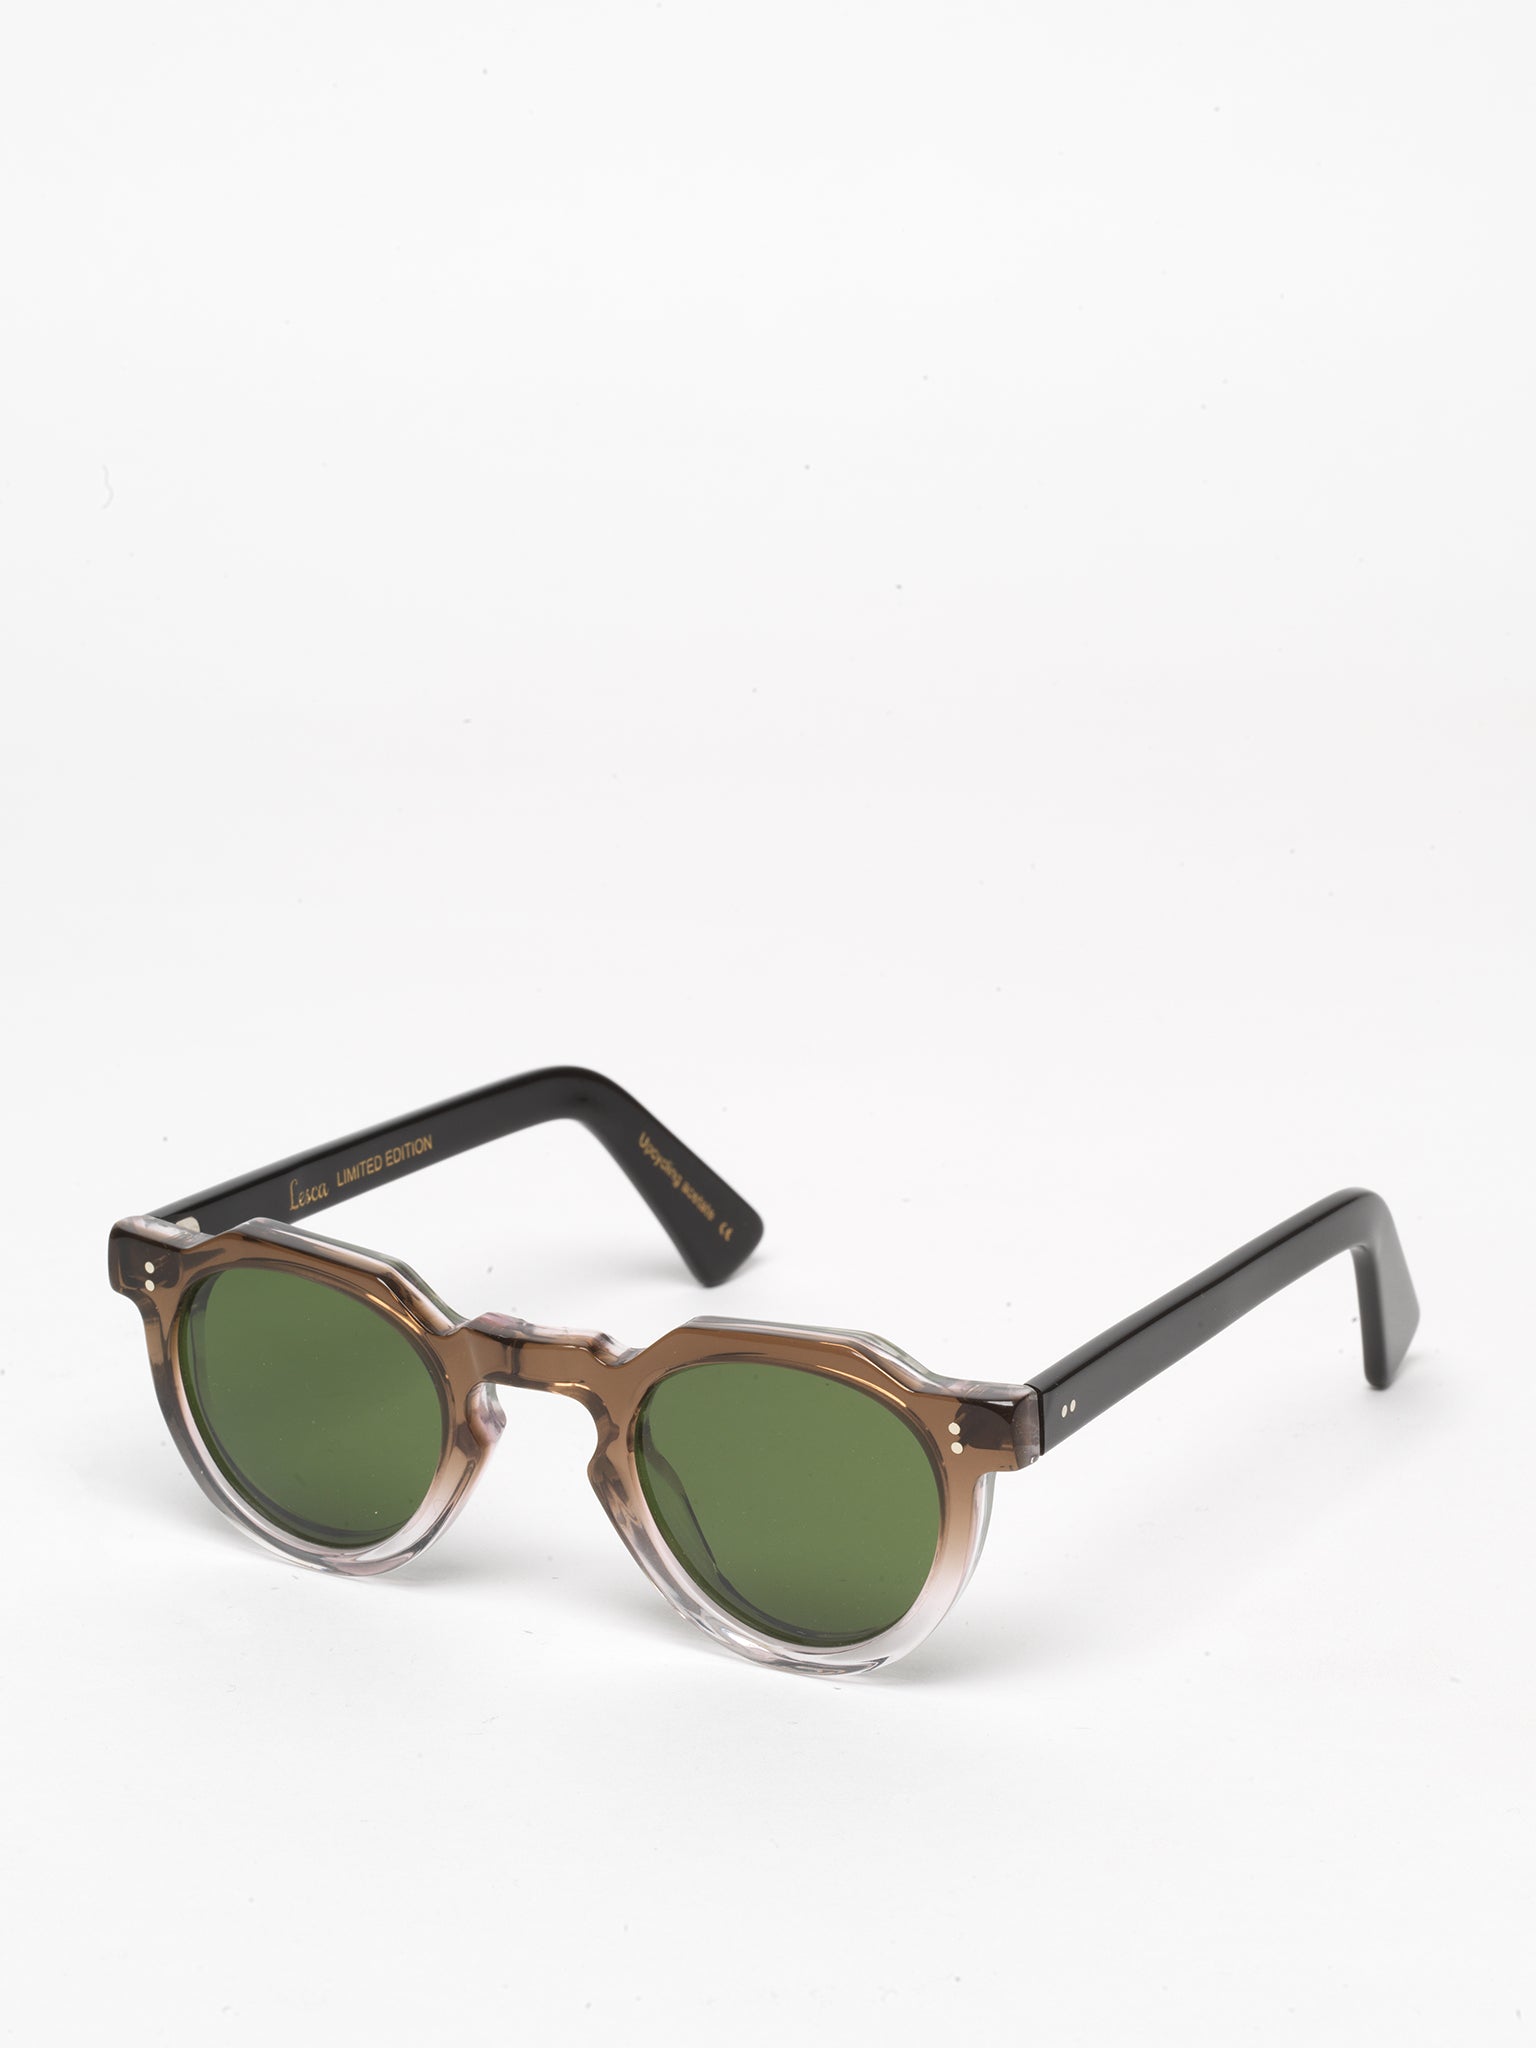 Lesca Lunetier / Crown Panto 8mm / Light Brown Crystal Fade with Dark  Vintage Green Mineral Lenses